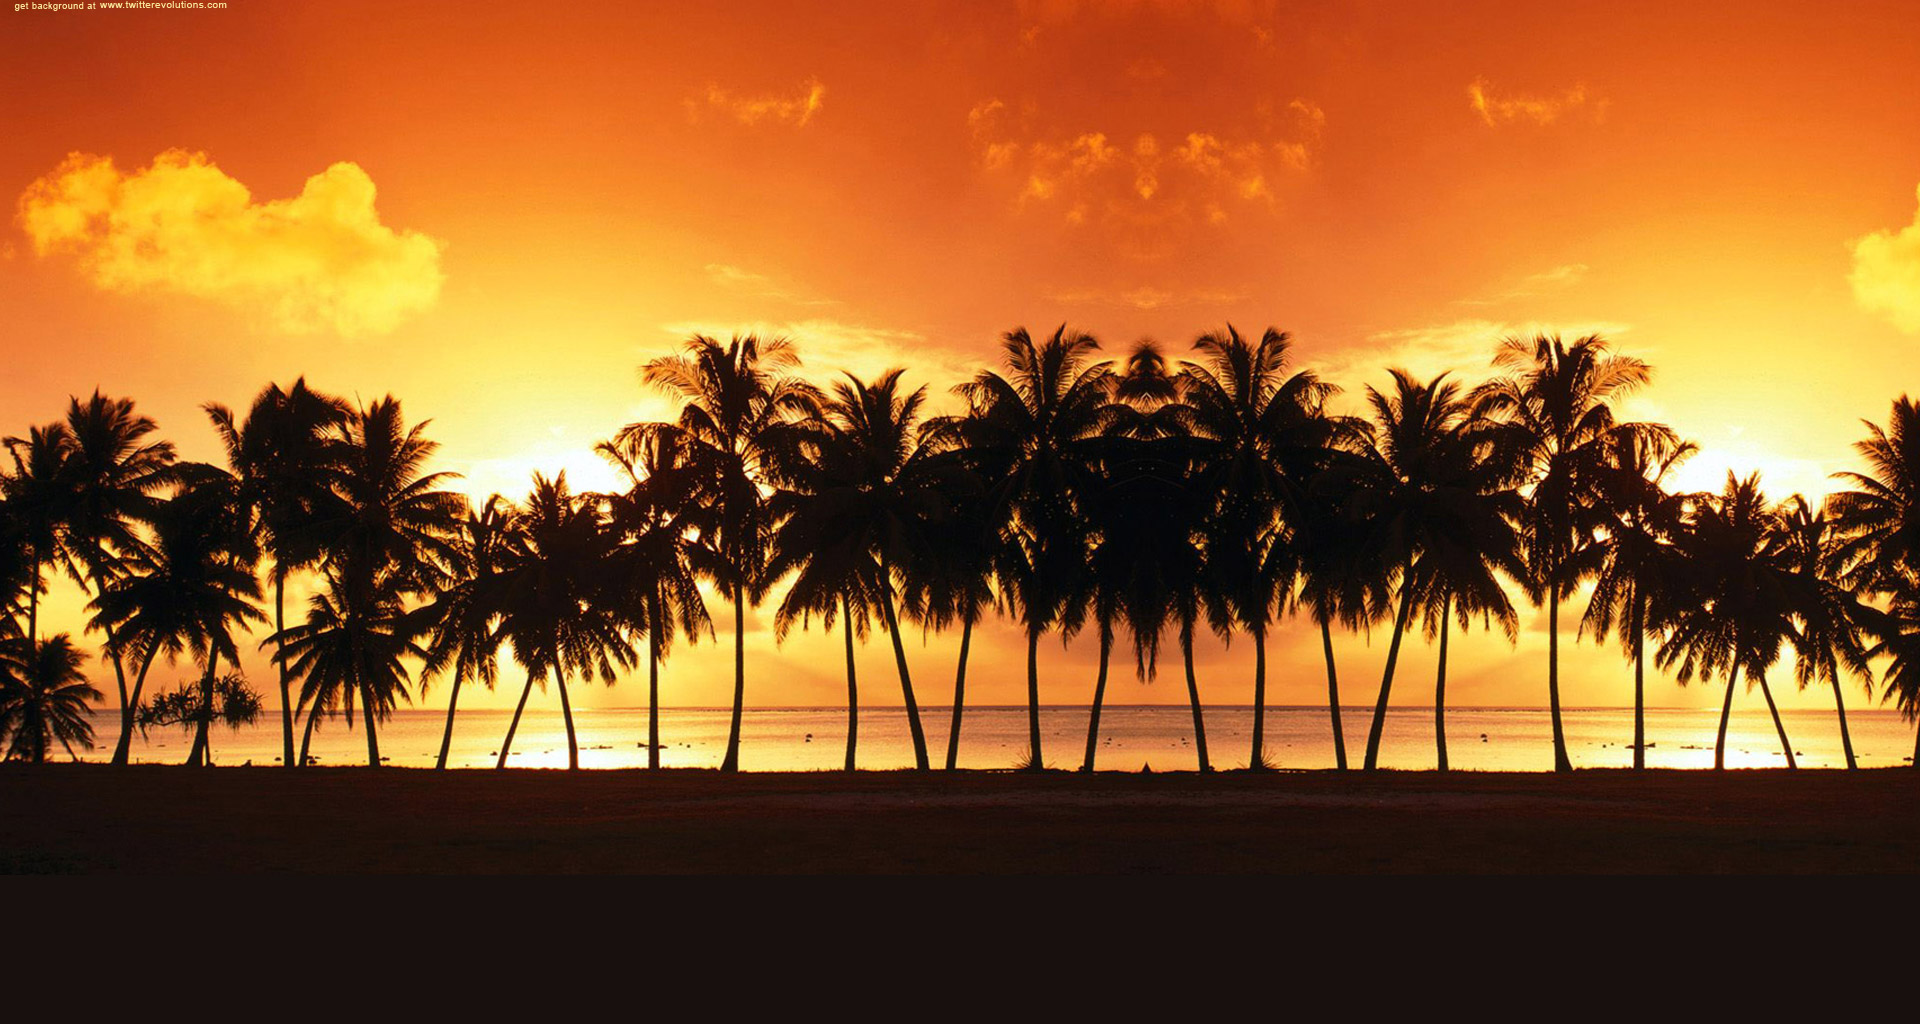 California Palm Trees Wallpaper
awesome Palm Tree Hd - Palm Trees Twitter Background - HD Wallpaper 